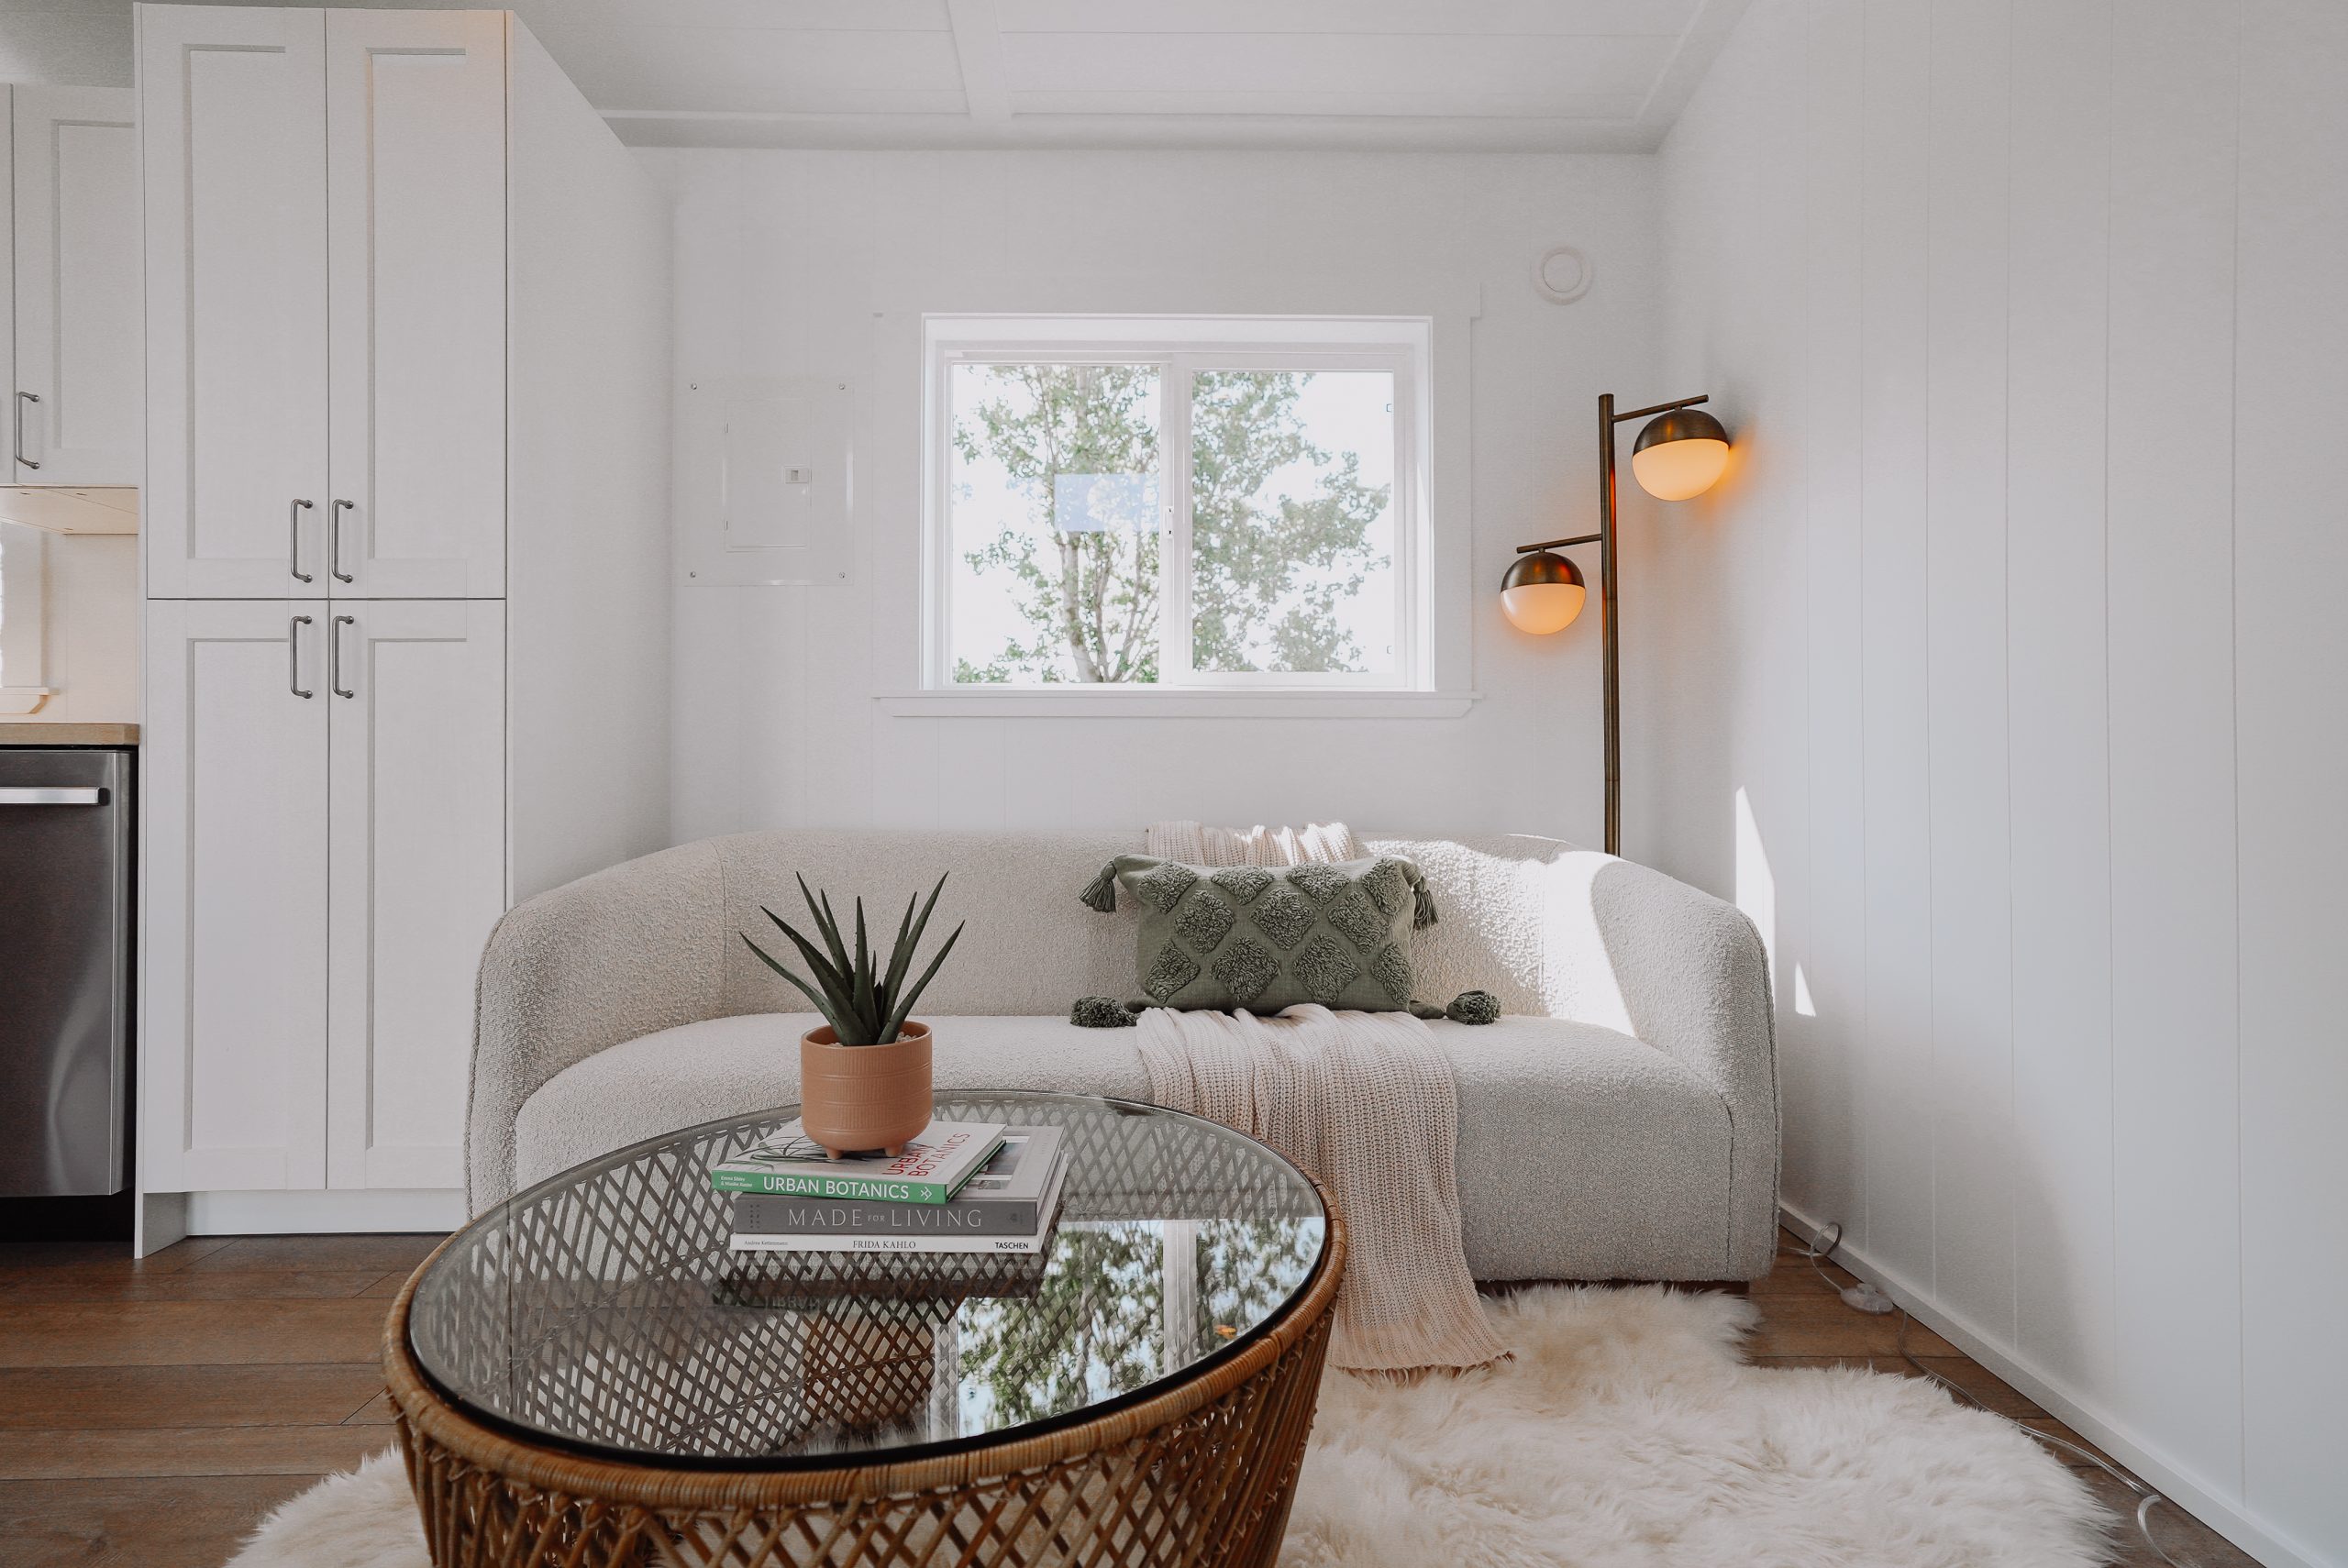 Tiny Home Minimalism: How-To Declutter, Downsize, and Stay Organized in a Tiny House